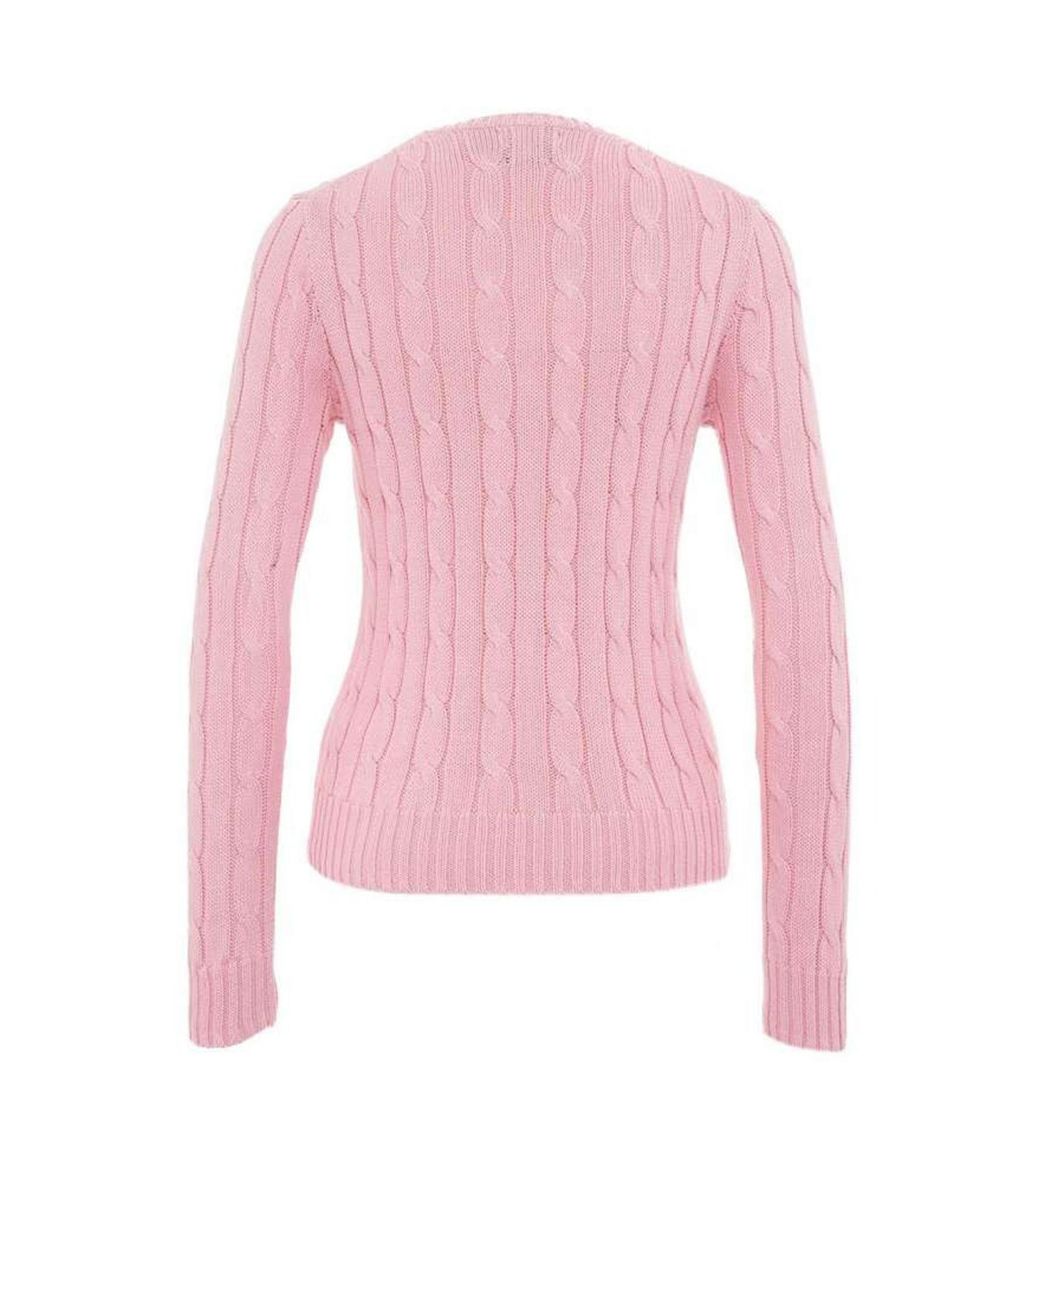 Polo Ralph Lauren Cable-knit Crewneck Sweater in Pink | Lyst